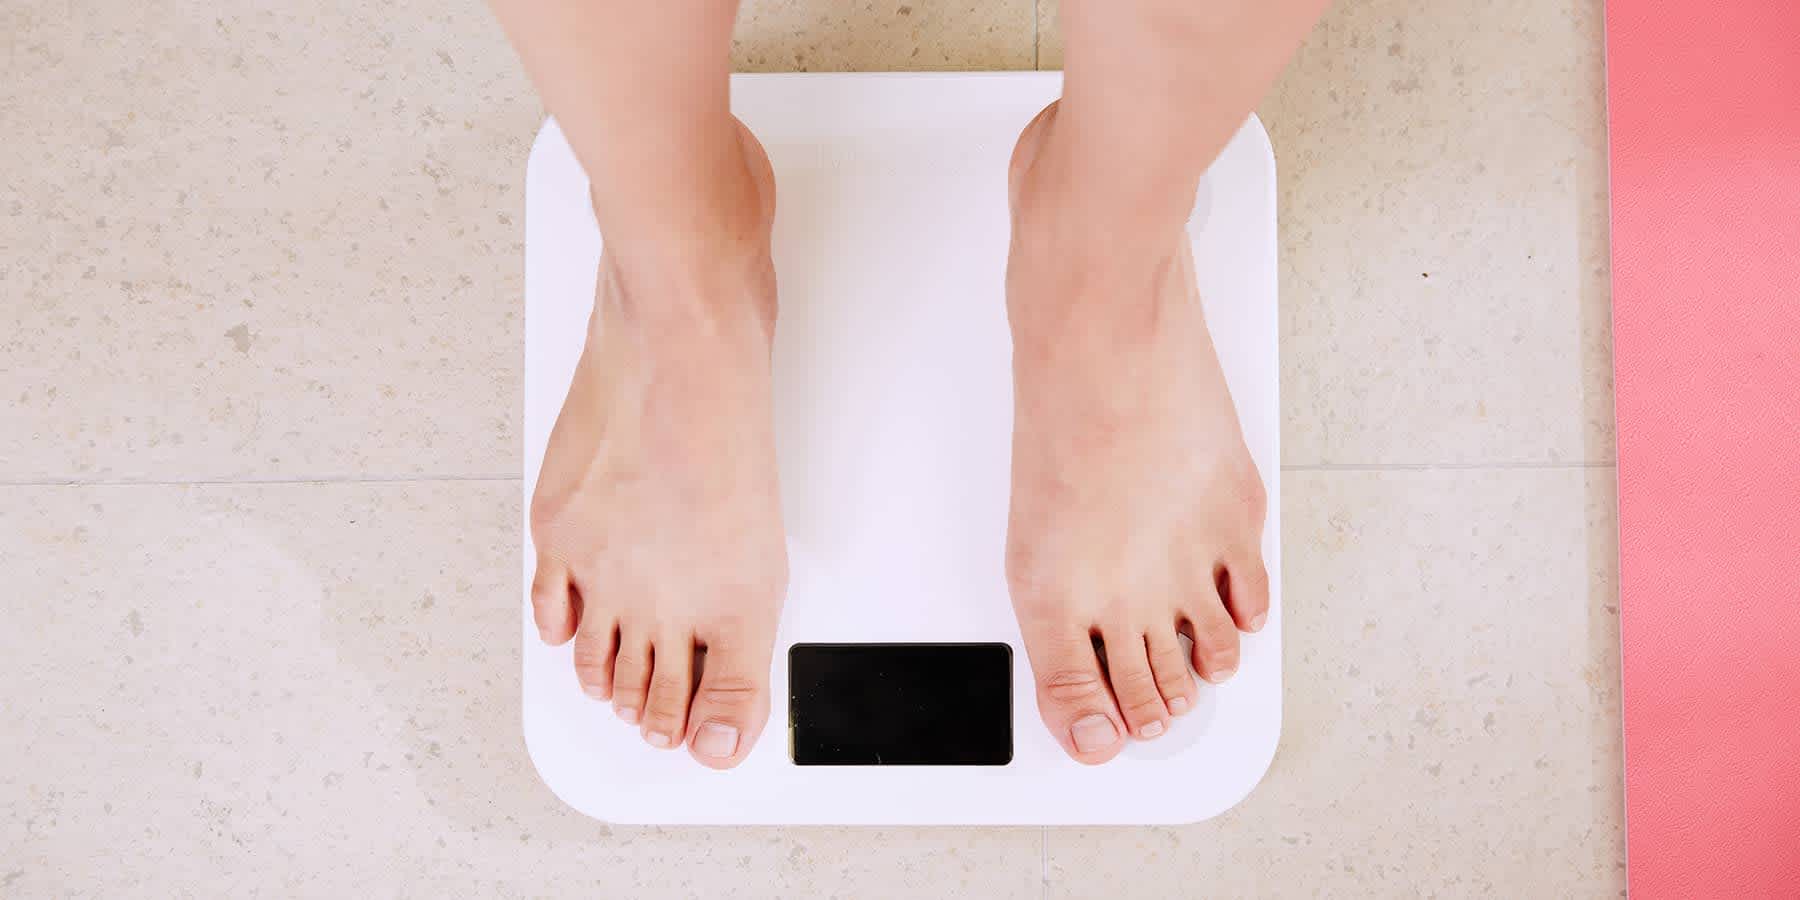 Person on bathroom scale wondering about prediabetes and weight gain